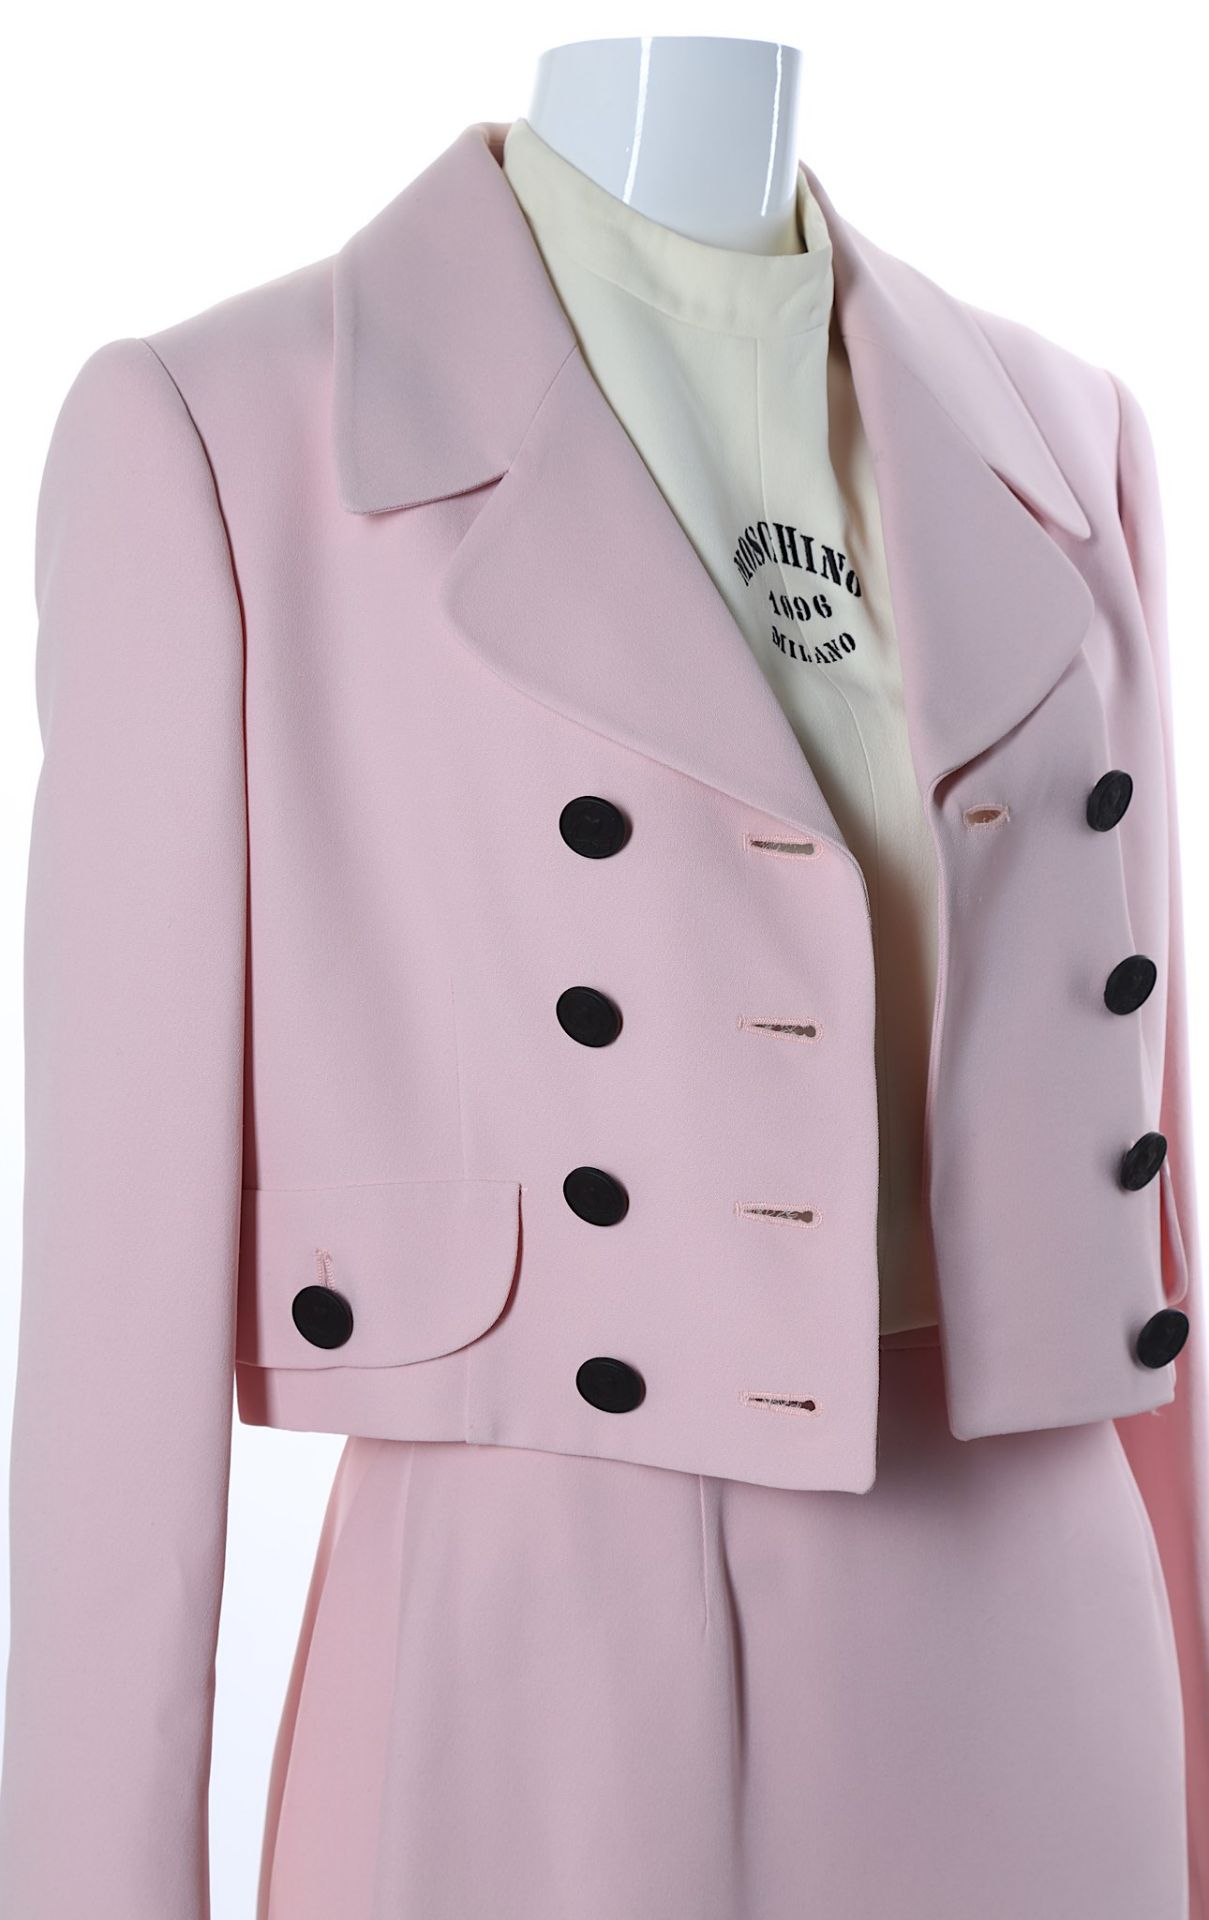 Moschino Cheap and Chic Pink Skirt Suit, 1990s, wi - Bild 4 aus 10